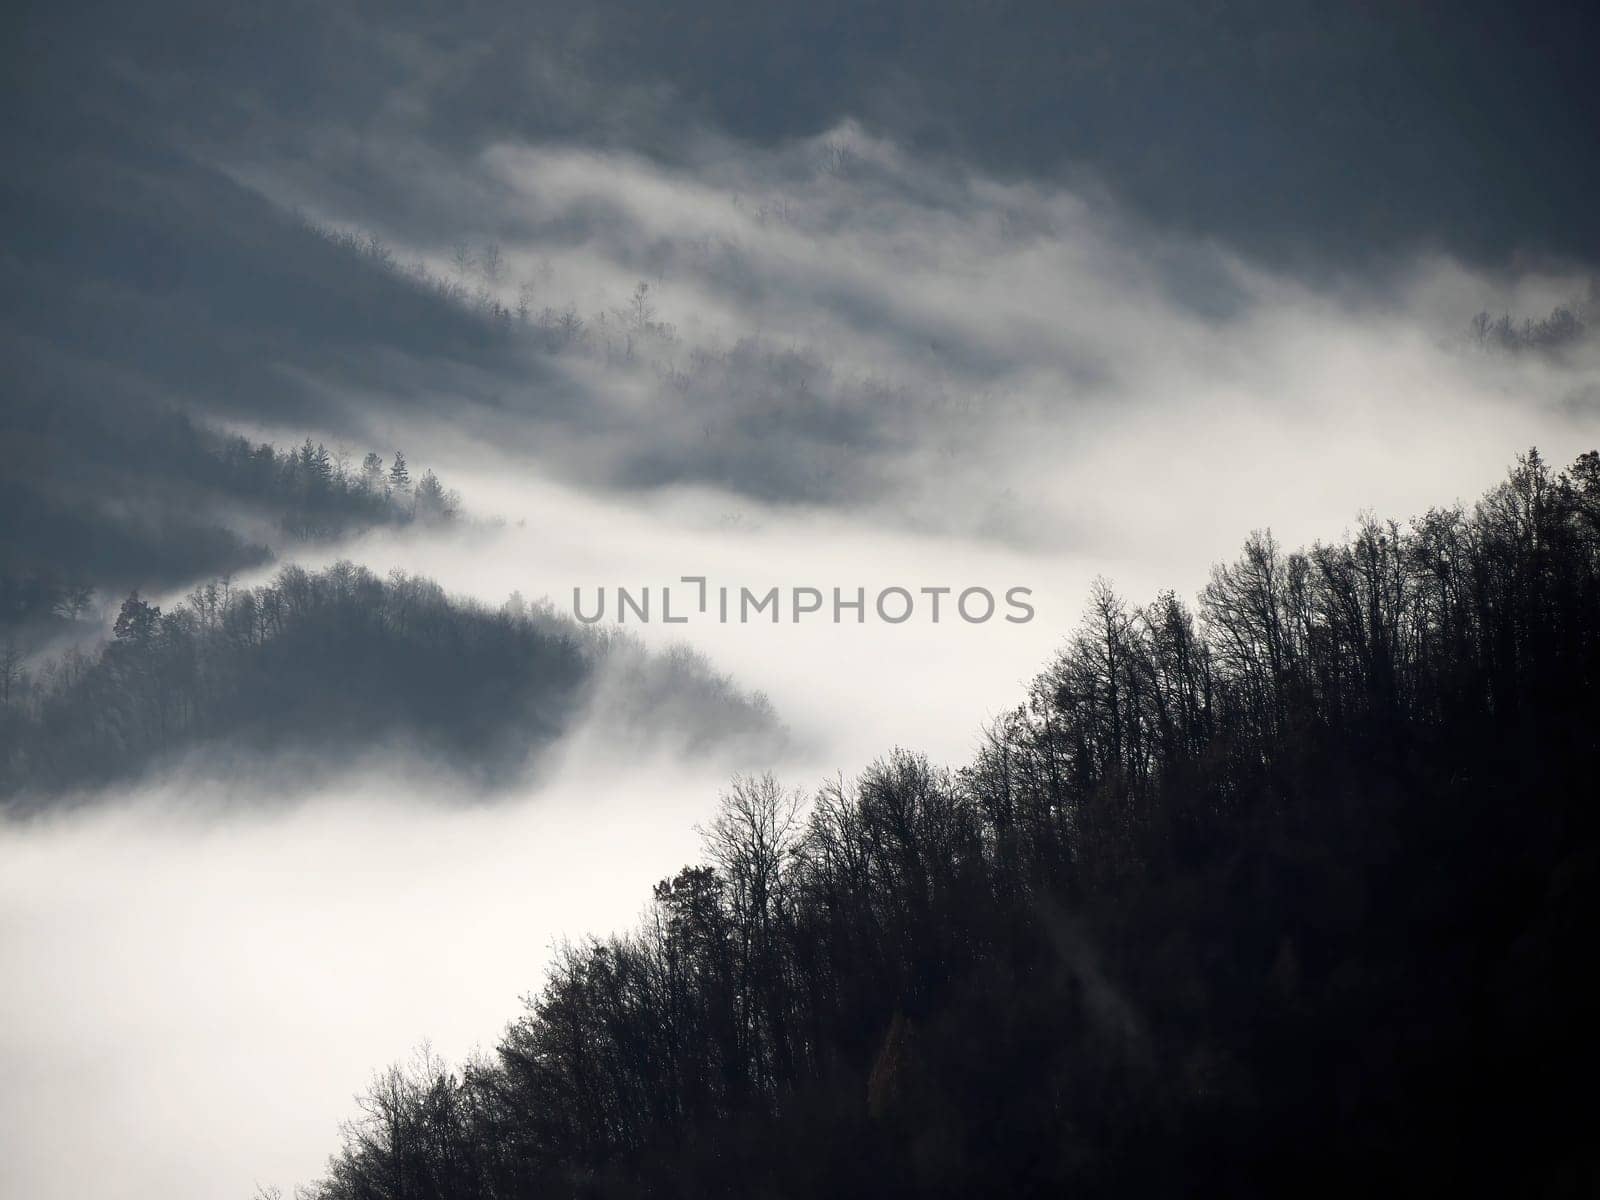 low clouds like fog in appennines valley around Bismantova stone a rock formation in the Tuscan-Emilian Apennines (Italy) by AndreaIzzotti